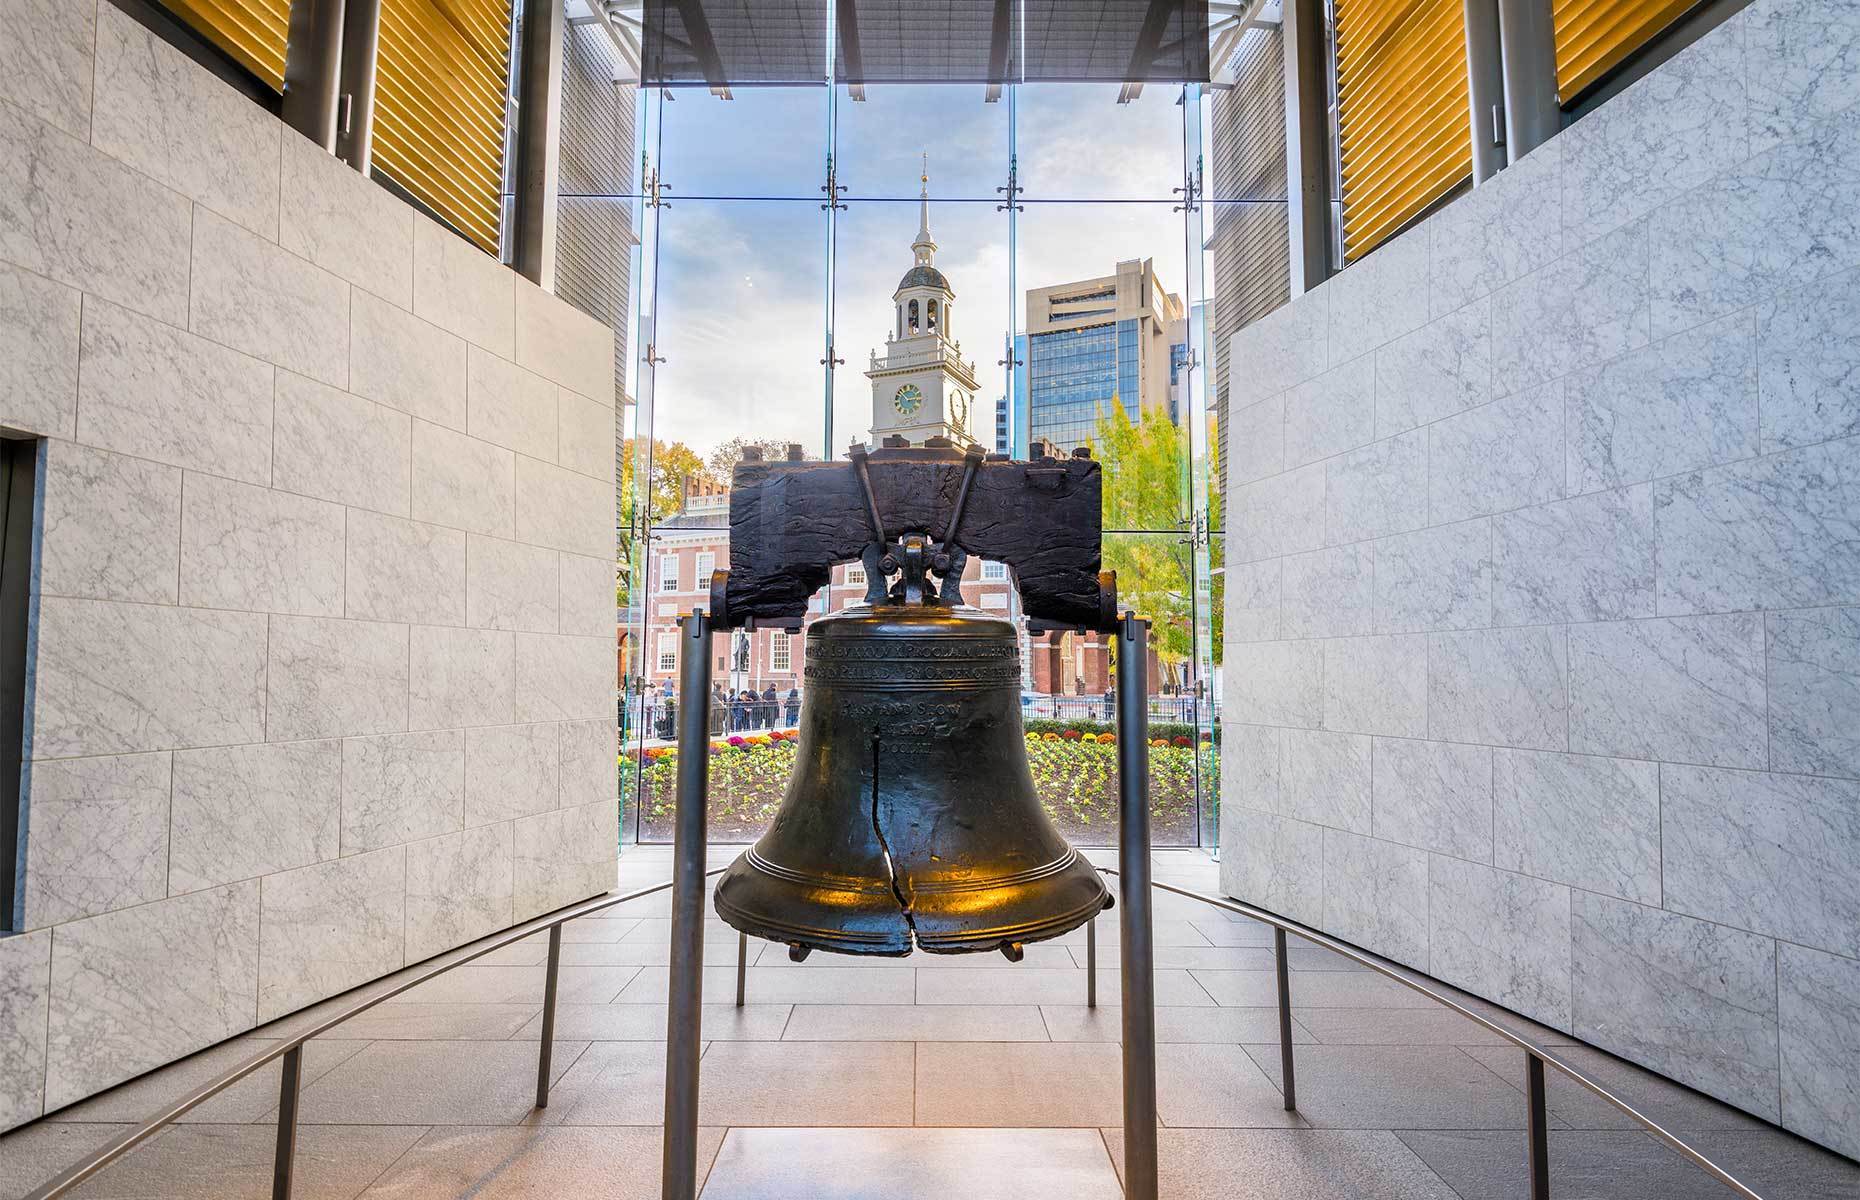 <p class="p1"><span>The Liberty Bell on display at <a href="https://www.nps.gov/inde/planyourvisit/libertybellcenter.htm" rel="noreferrer noopener"><span>526 Market Street</span></a> is an enduring symbol of American independence. The bell is believed <a href="http://www.ushistory.org/libertybell/" rel="noreferrer noopener"><span>to have been rung</span></a> during the first reading of the Declaration of Independence in 1776. Consider visiting the nearby <a href="https://www.nps.gov/inde/planyourvisit/independencevisitorcenter.htm" rel="noreferrer noopener"><span>Independence Visitor Center</span></a> as well.</span></p>